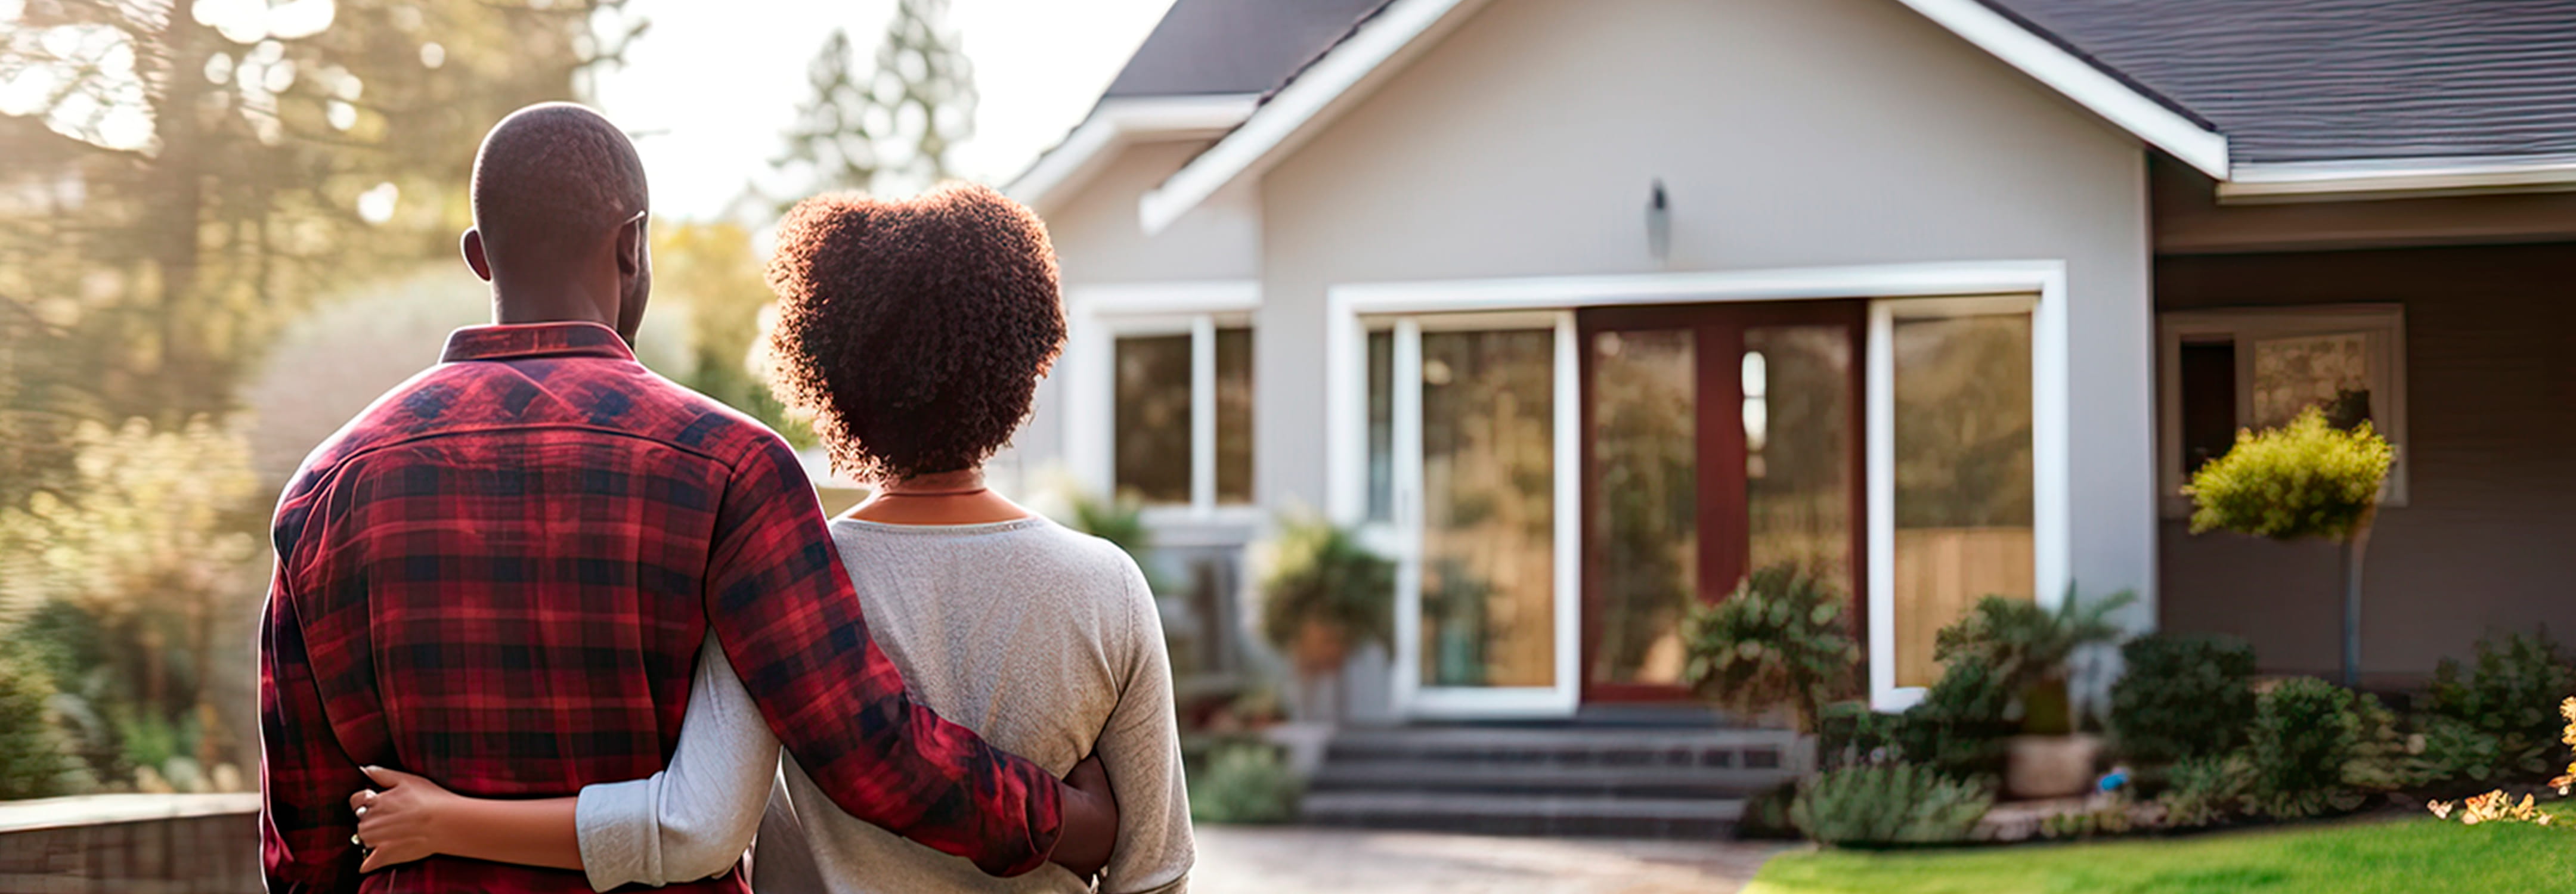 Your home’s equity is like money hiding in plain sight.